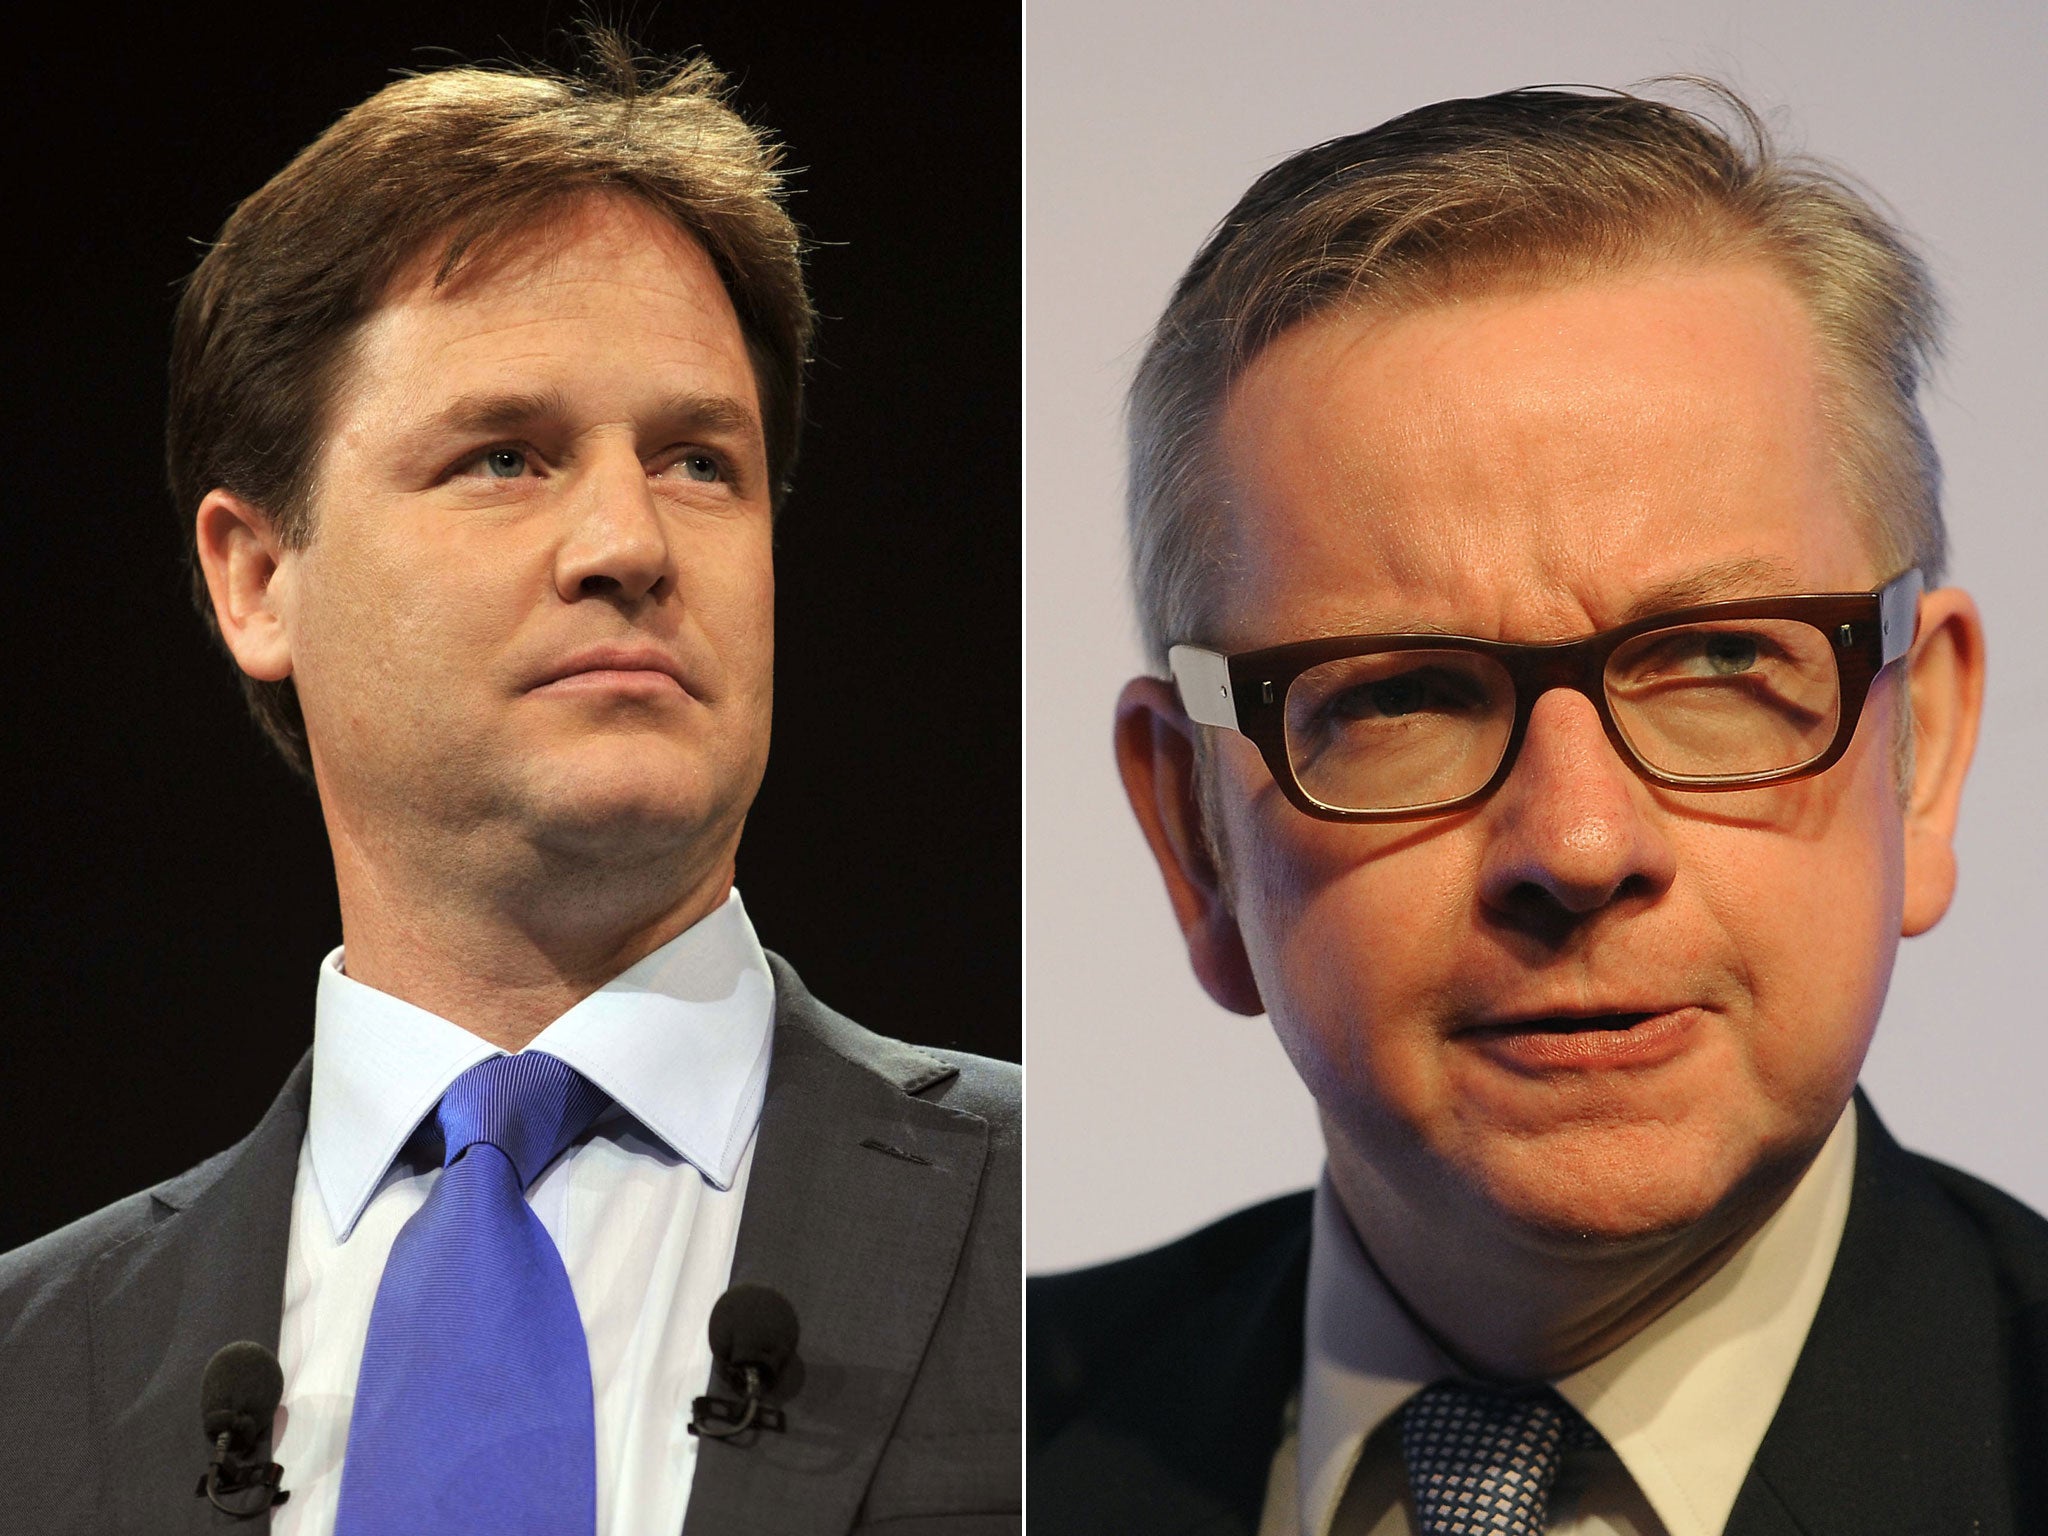 According to the blog posted by Dominic Cummings, all is not well between Nick Clegg and Micheal Gove